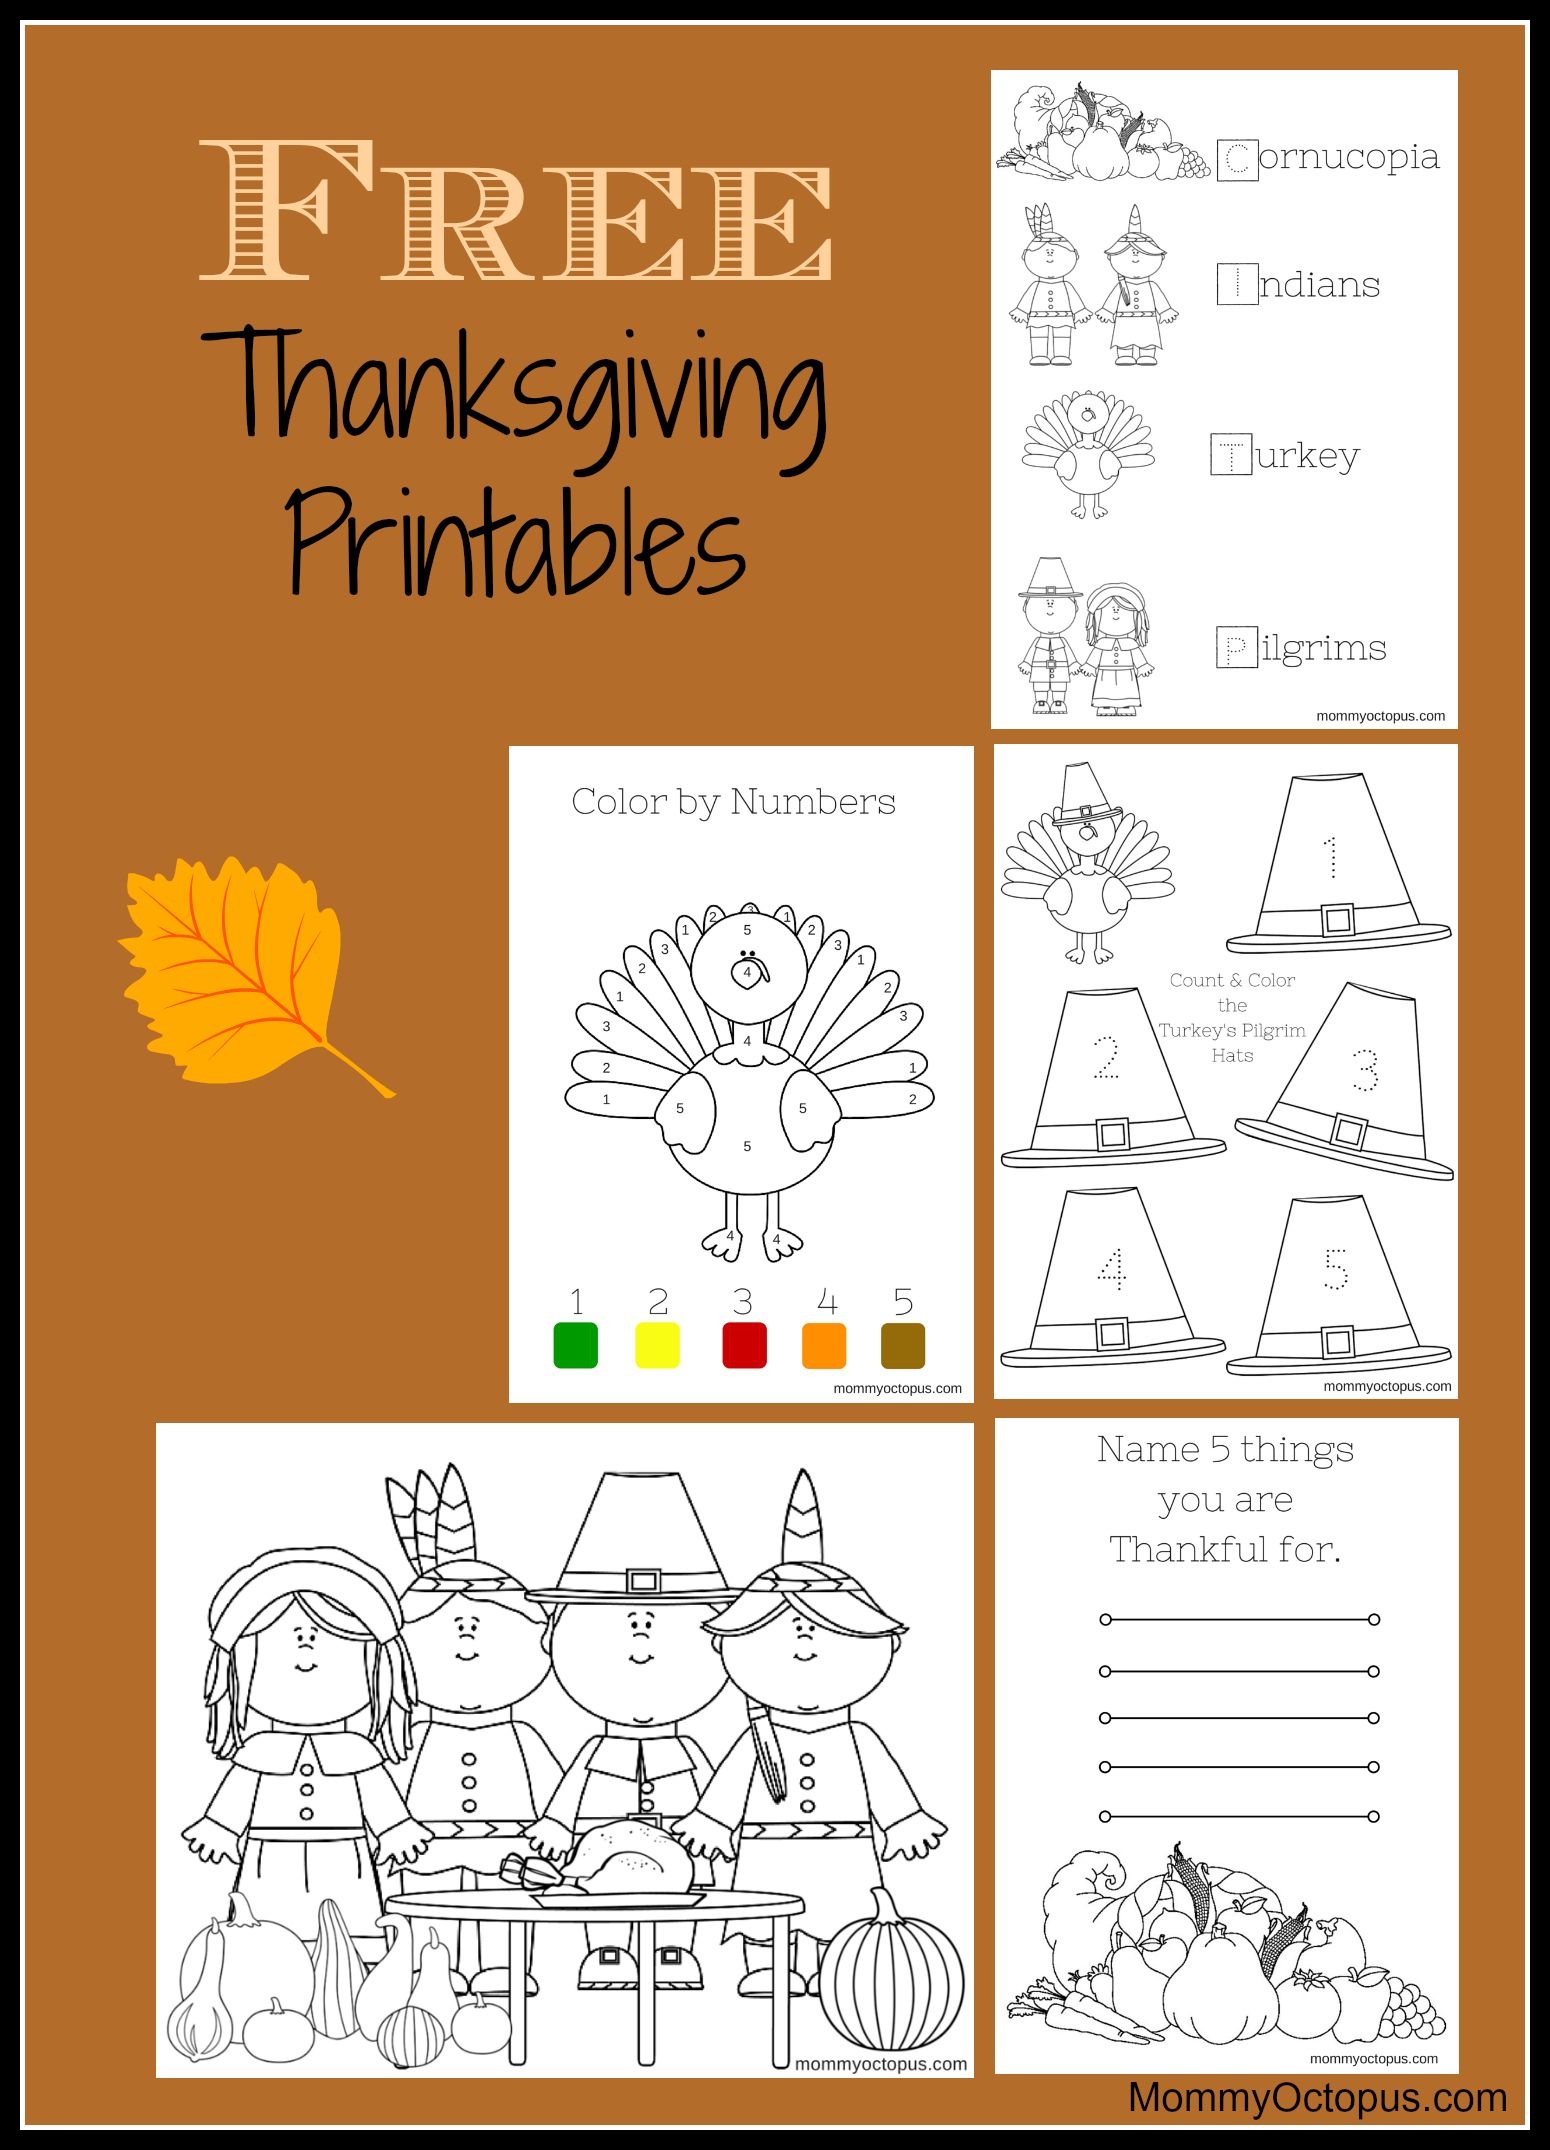 Free Thanksgiving Printable Activity Sheets! | Thanksgiving &amp;amp; Fall - Free Printable Thanksgiving Activities For Preschoolers